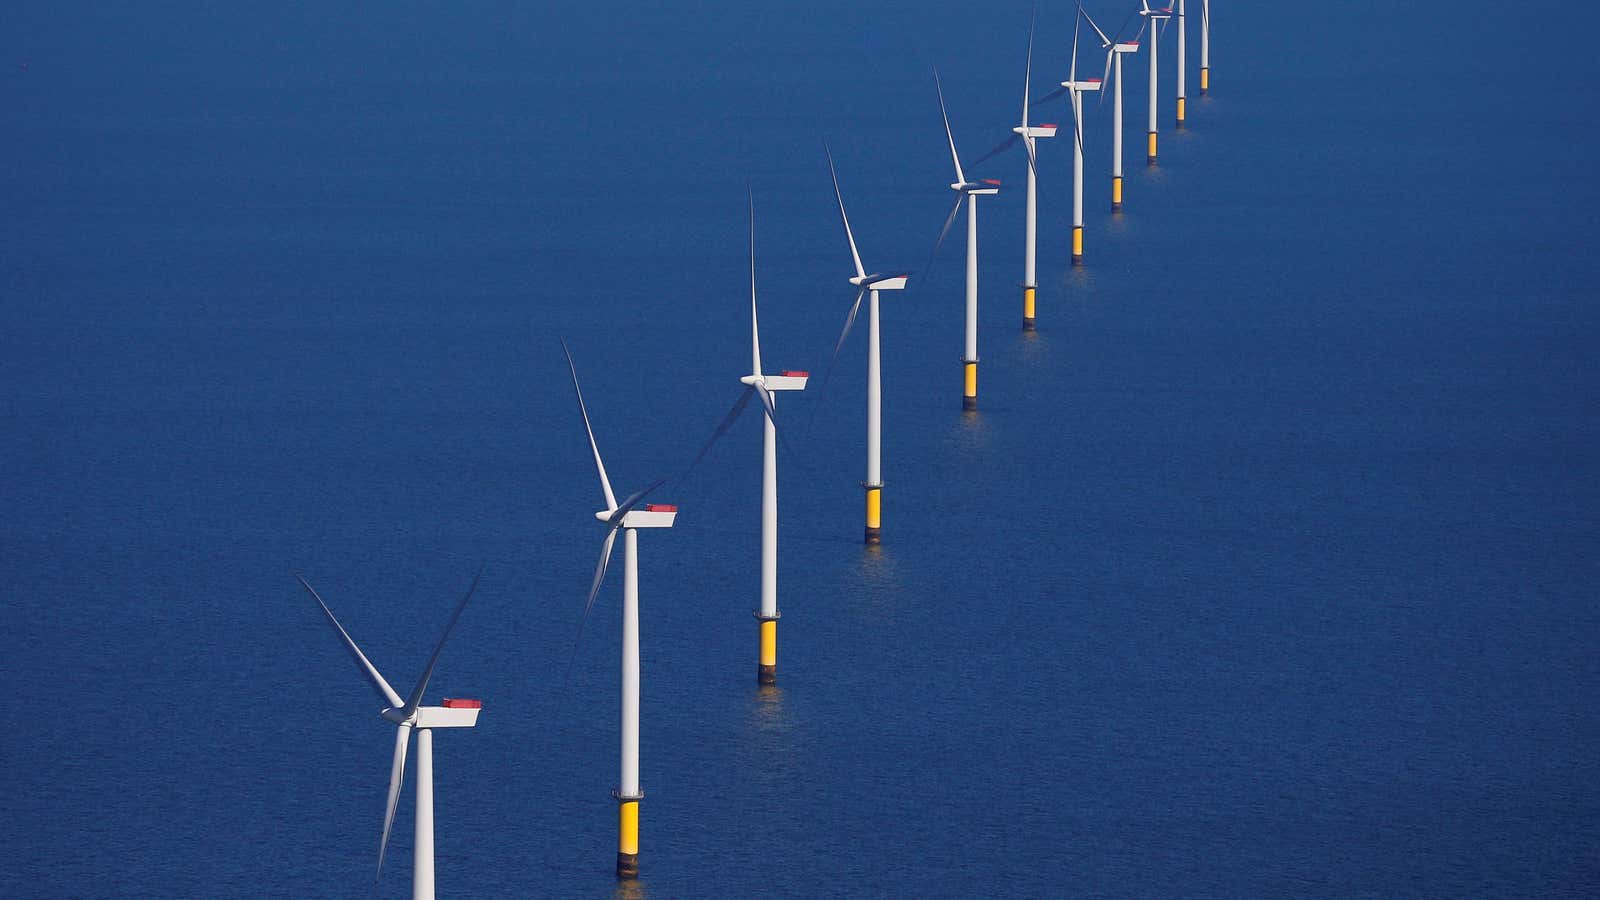 The Danish firm Orsted is building a giant wind farm off the shore of Taiwan, in part to meet demand for clean energy from factories that supply Apple.